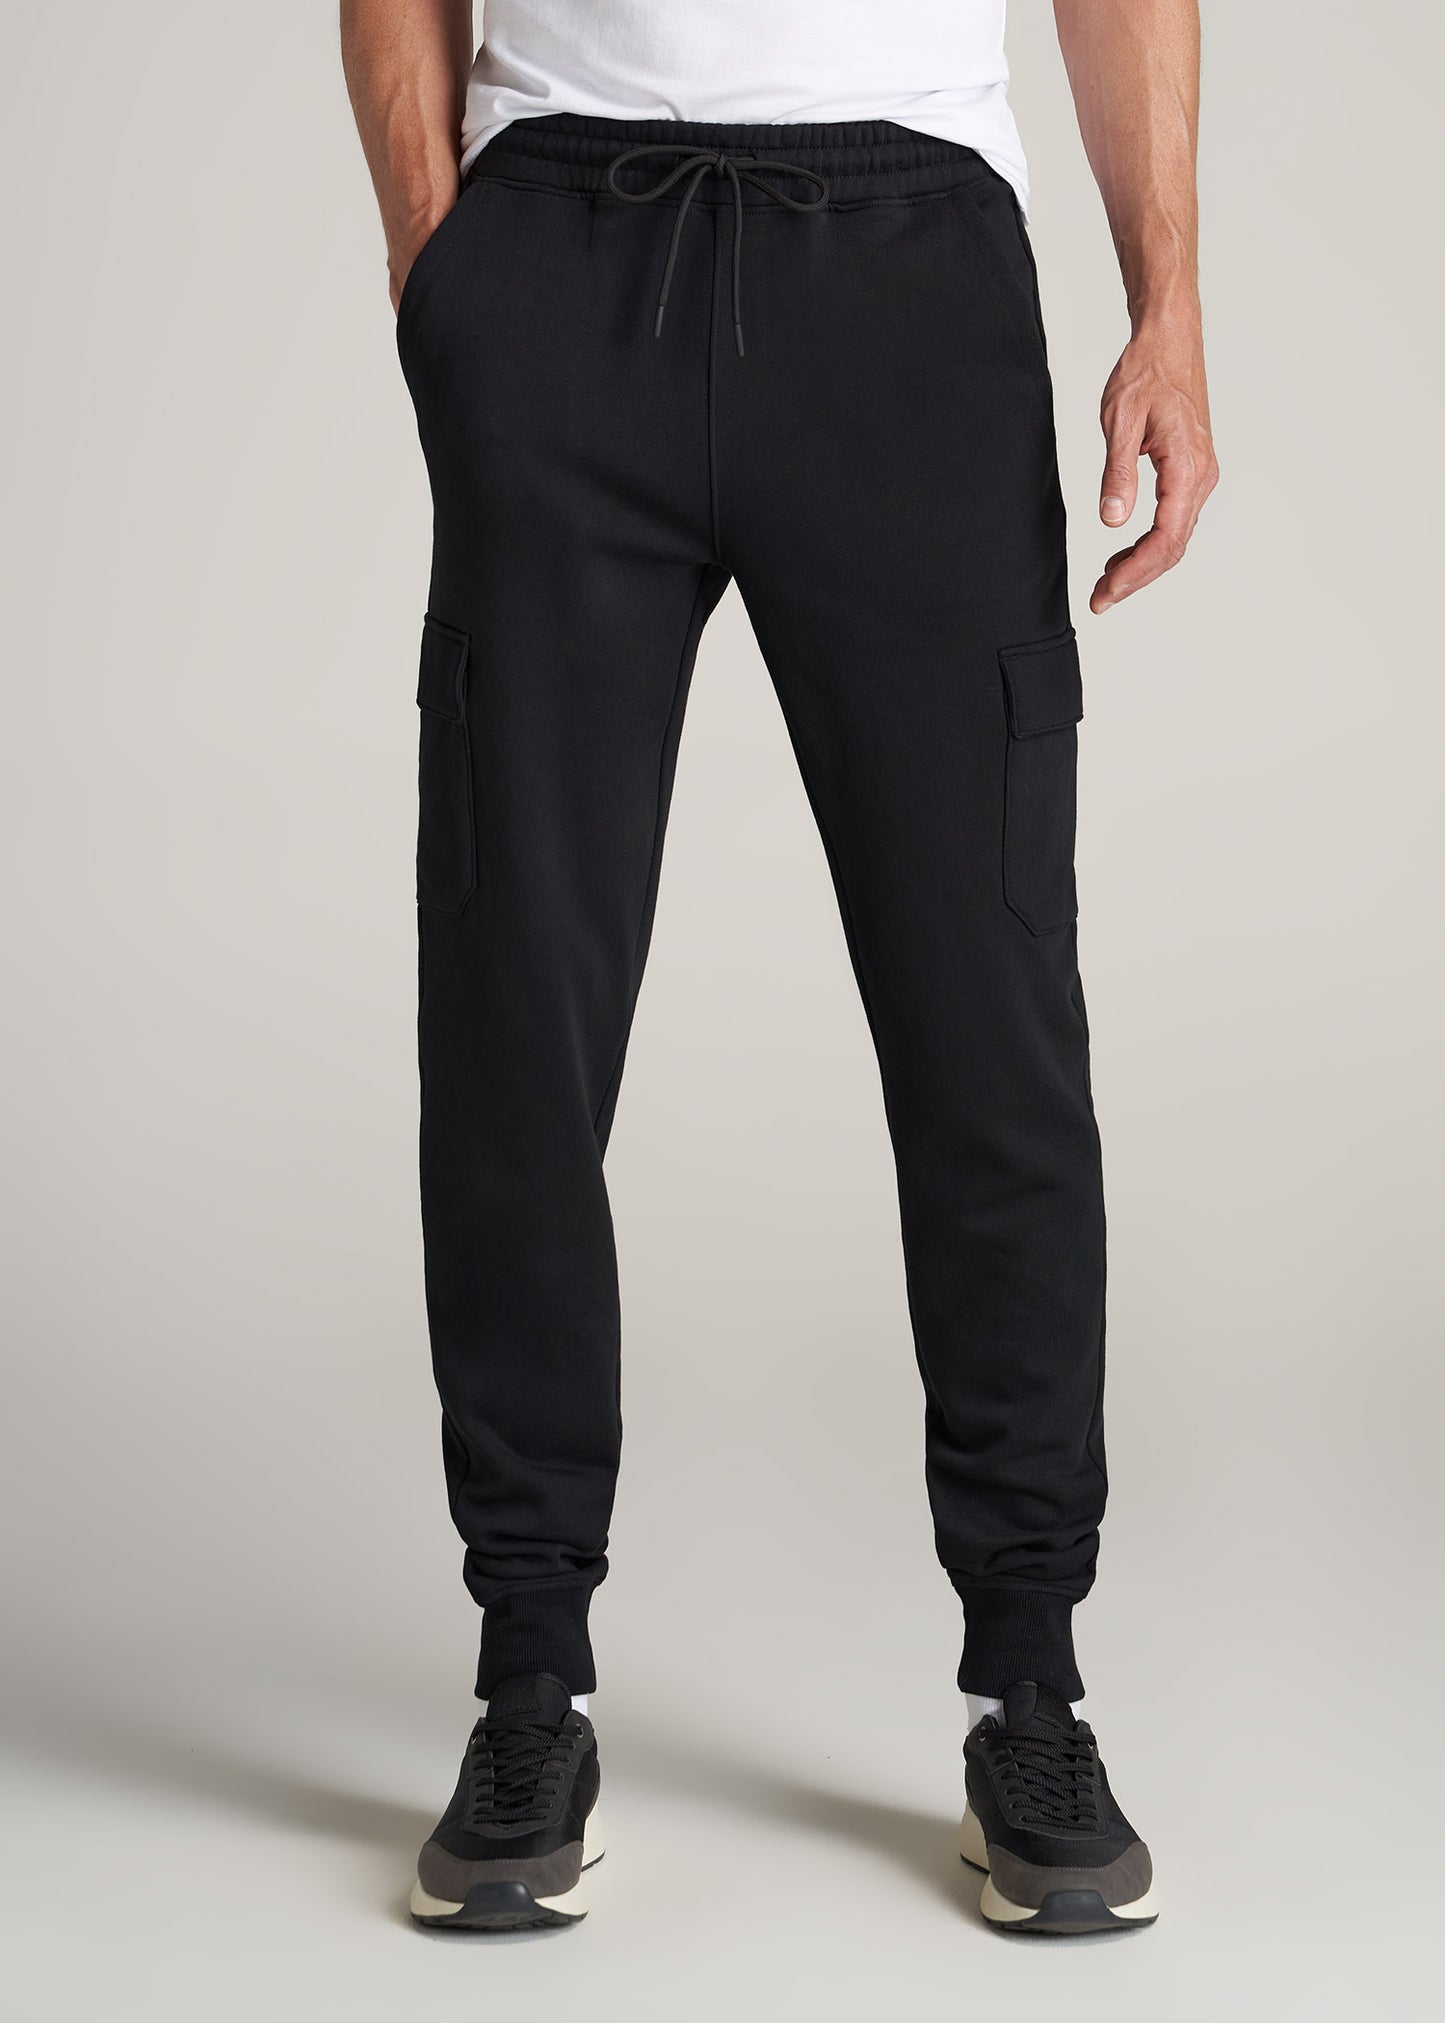 New Release Mens Gym Wear  Mens outfits, Mens joggers, Fashion pants